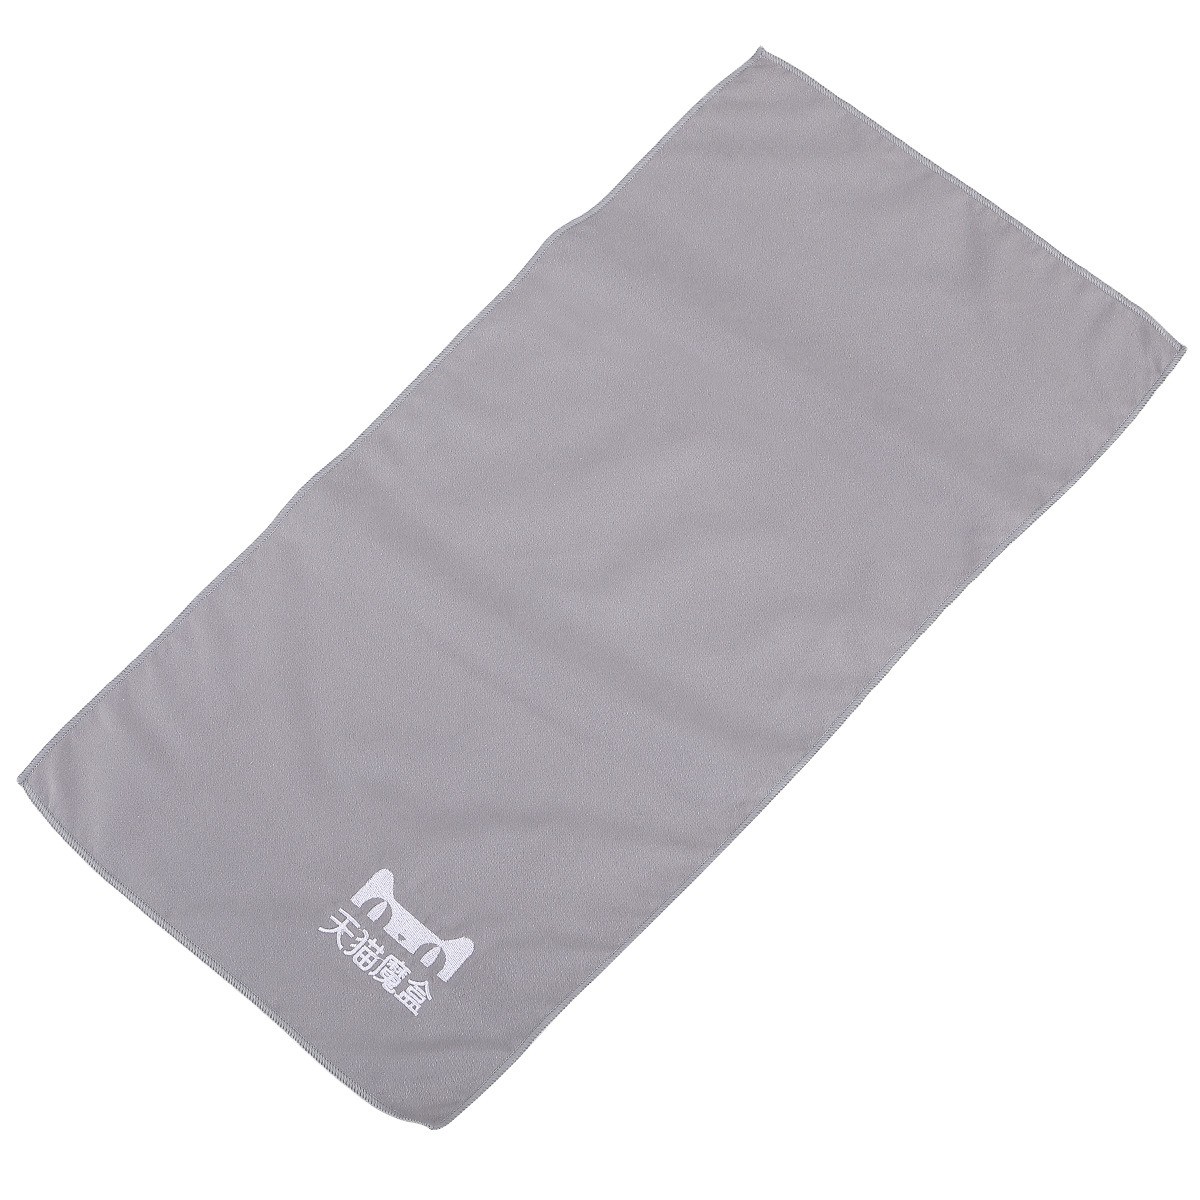 Double-Sided Fleece Quick Drying Exercise Sports Beach Towel